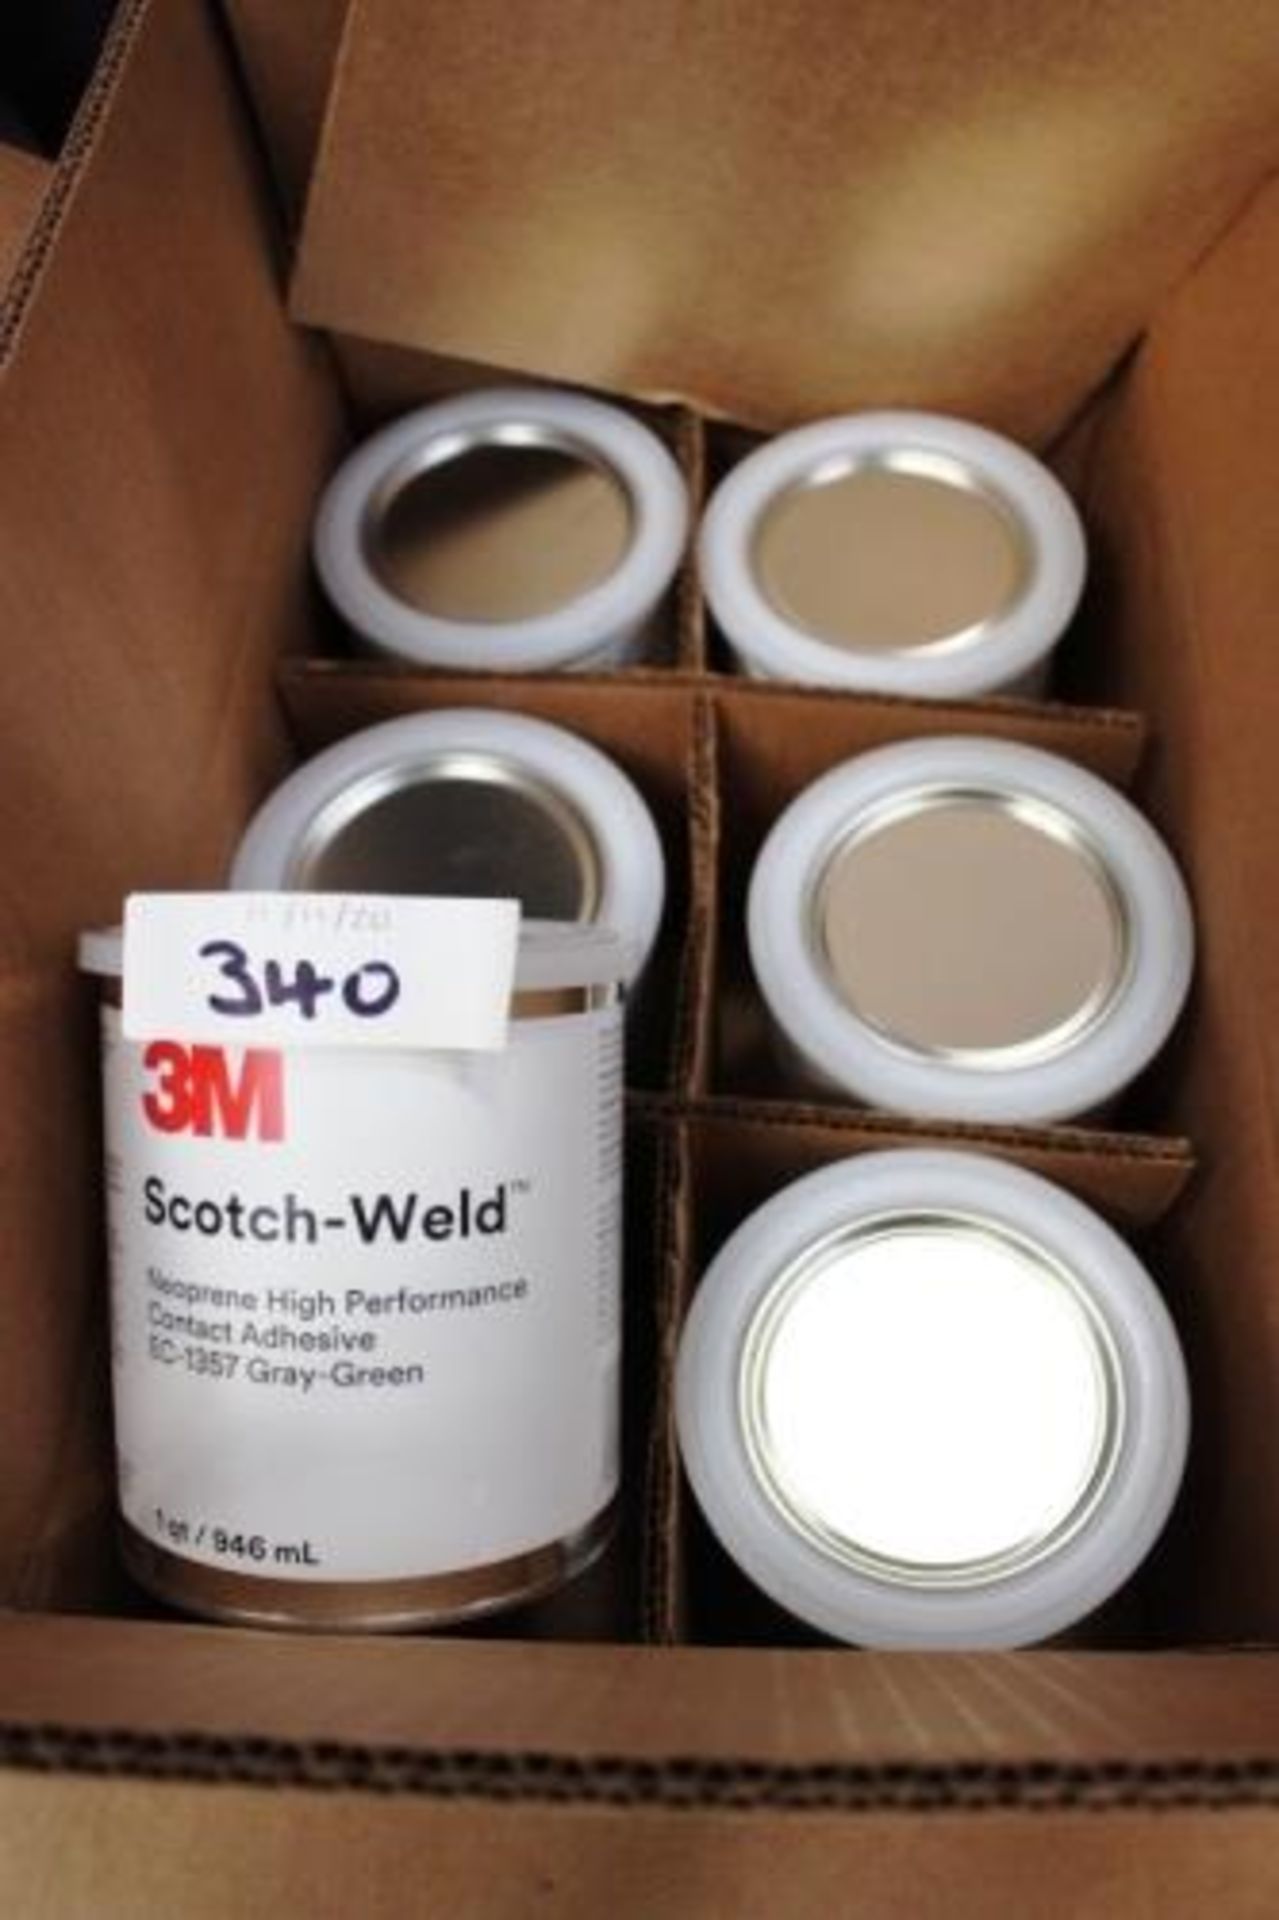 1 x 3M scotch weld high performance neoprene contact adhesive, Model EC-1357, colour grey-green - Image 4 of 5